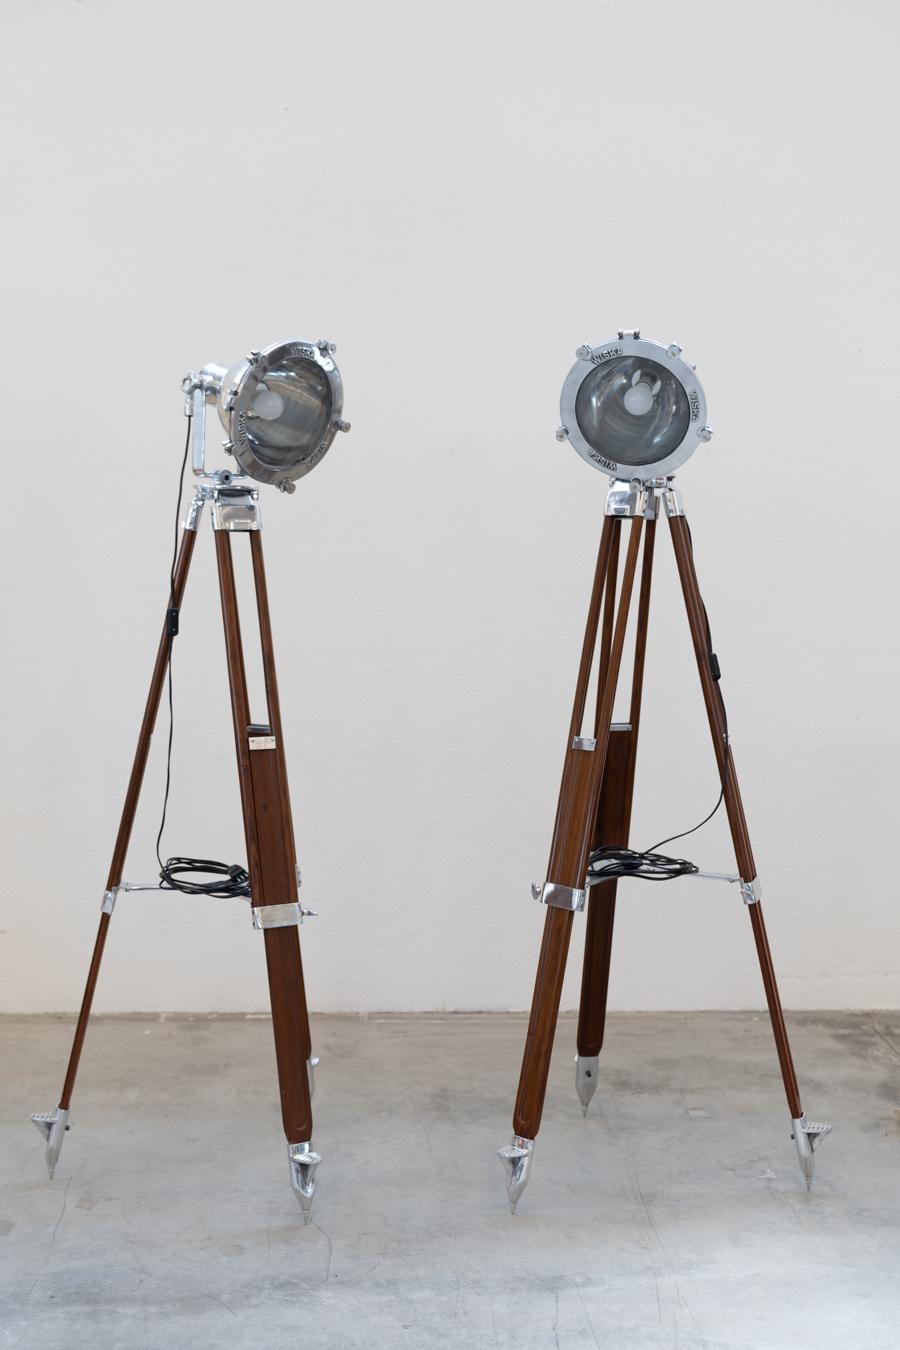 Pair of nautical projector tripod floor lamps WISKA high 			vintage style wood 1980/1990
Style
Modernist
Periodo del design
1980 - 1989
Production Period
1990 – 1999
Year Manufactured
1990
Country of Manufacture
Italy
Material
Anodized aluminum,